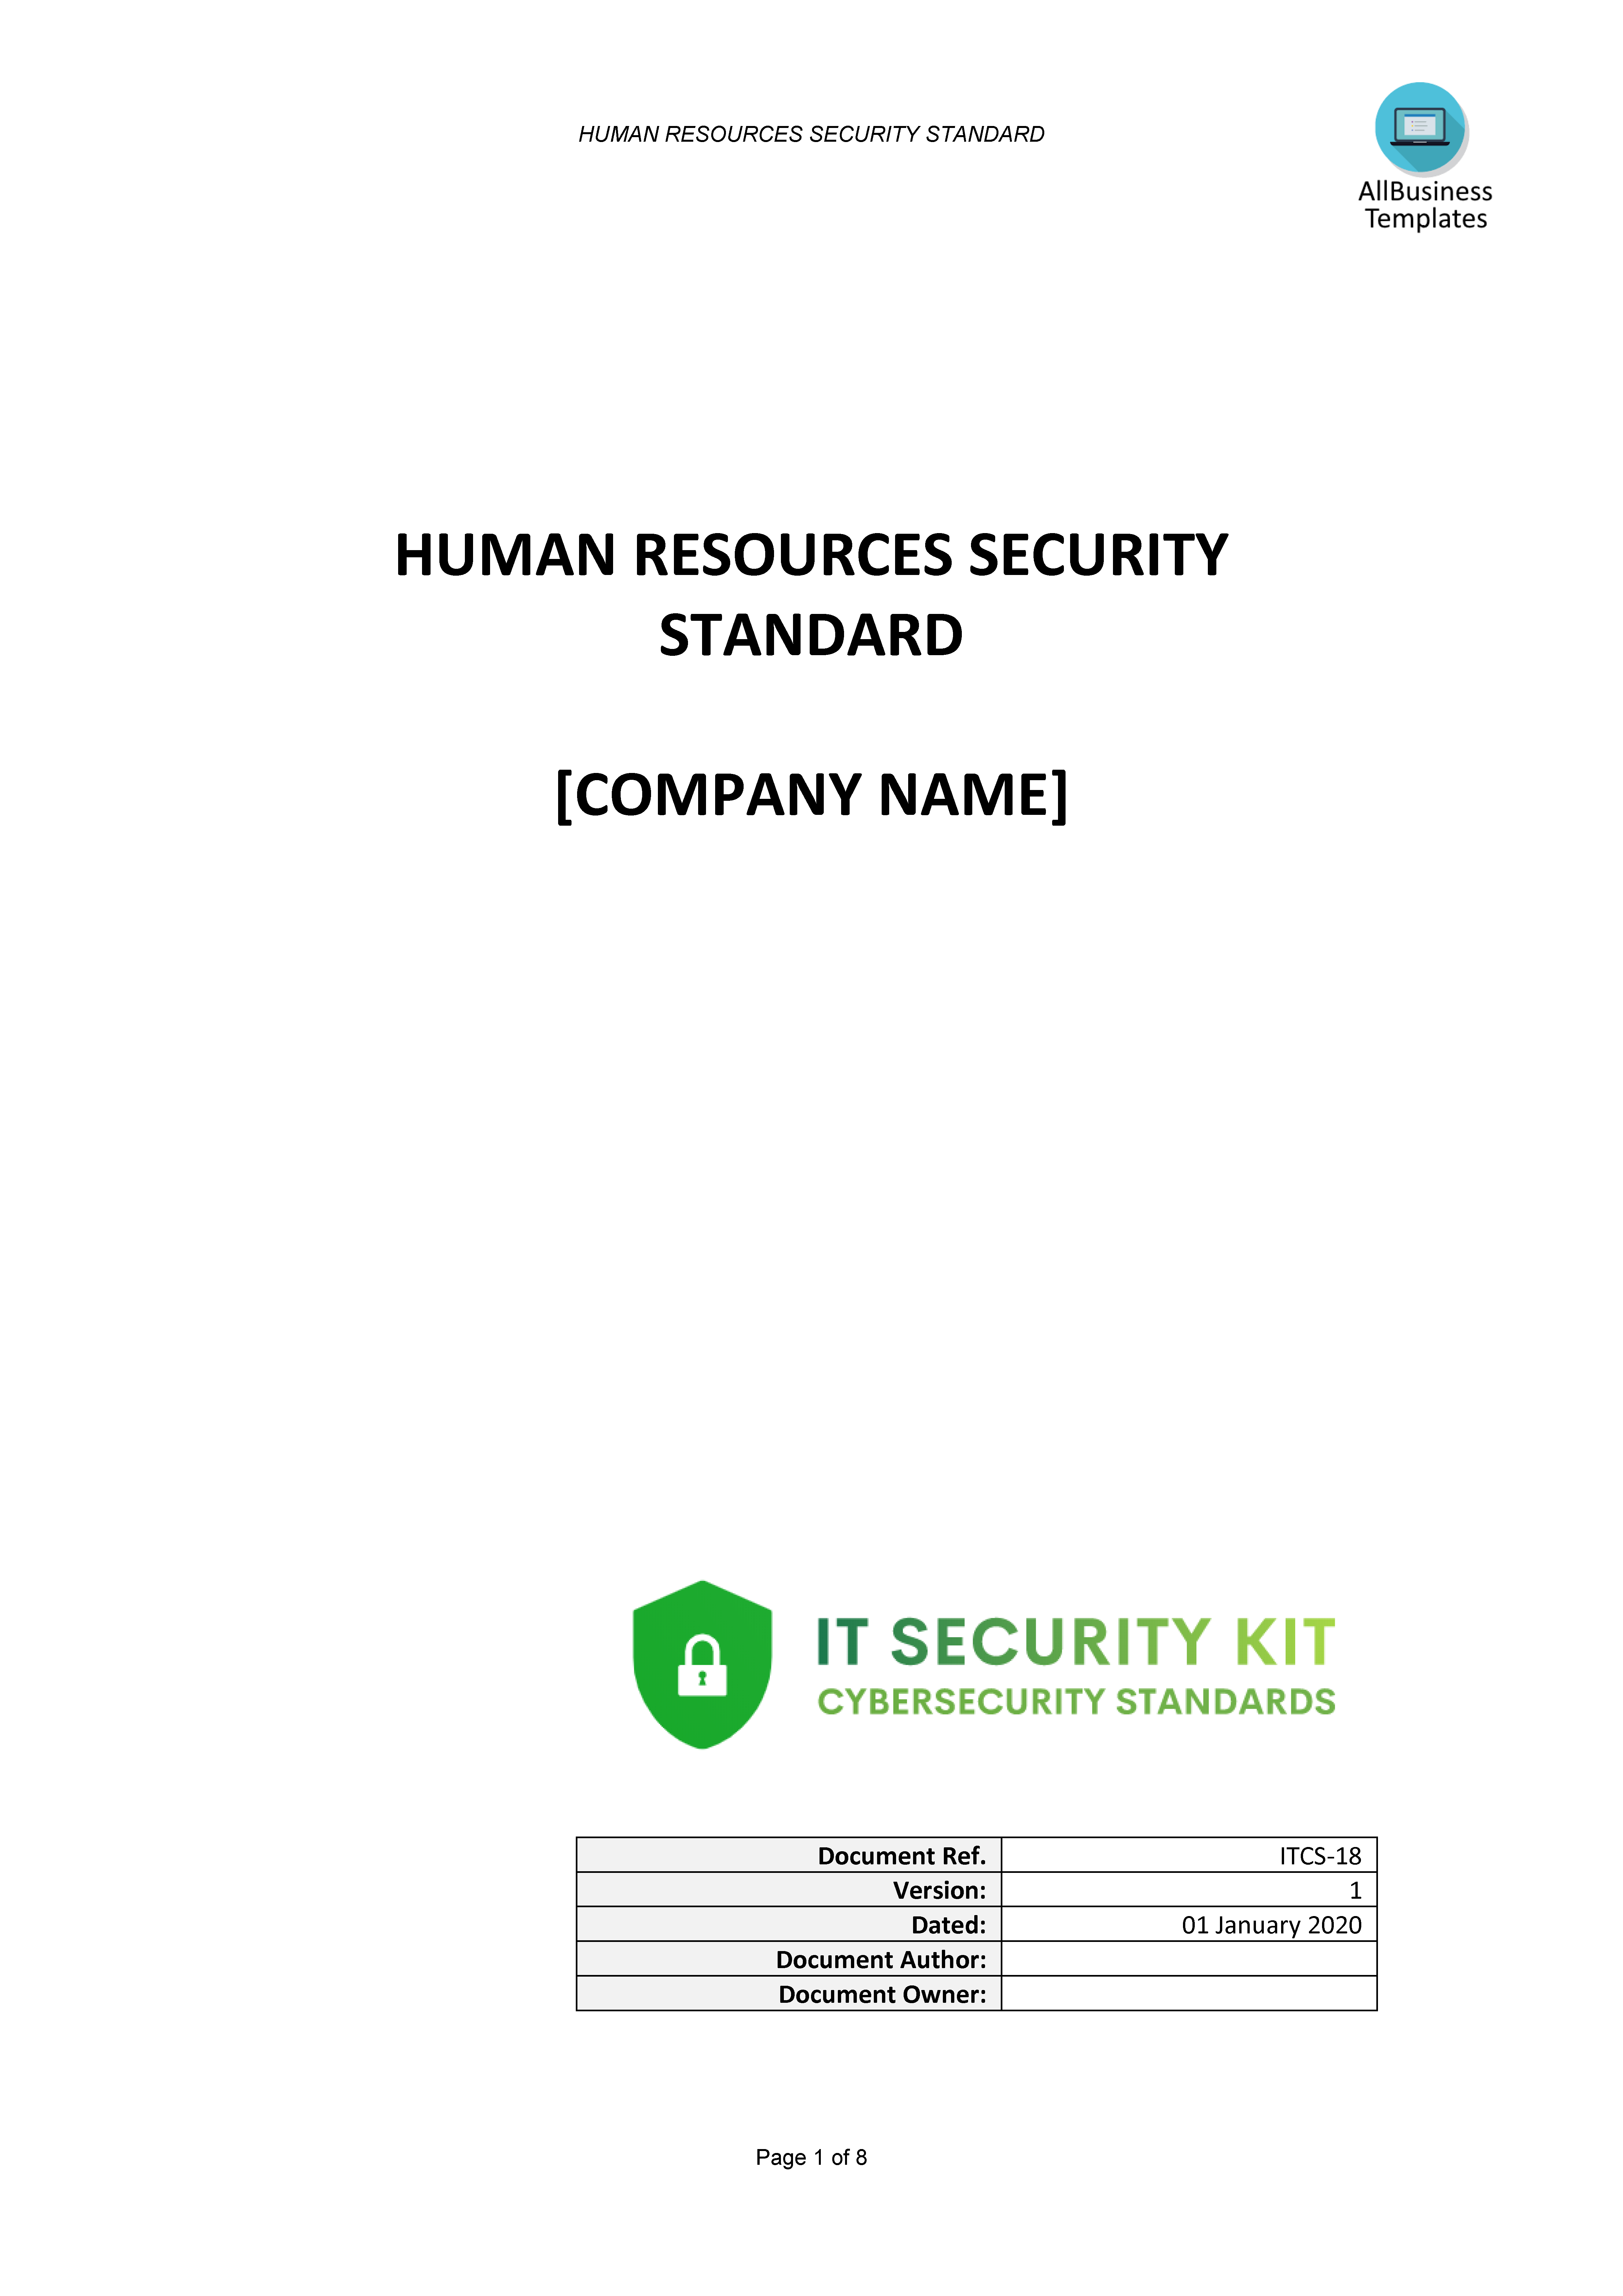 Human Resources IT Cybersecurity Standard main image